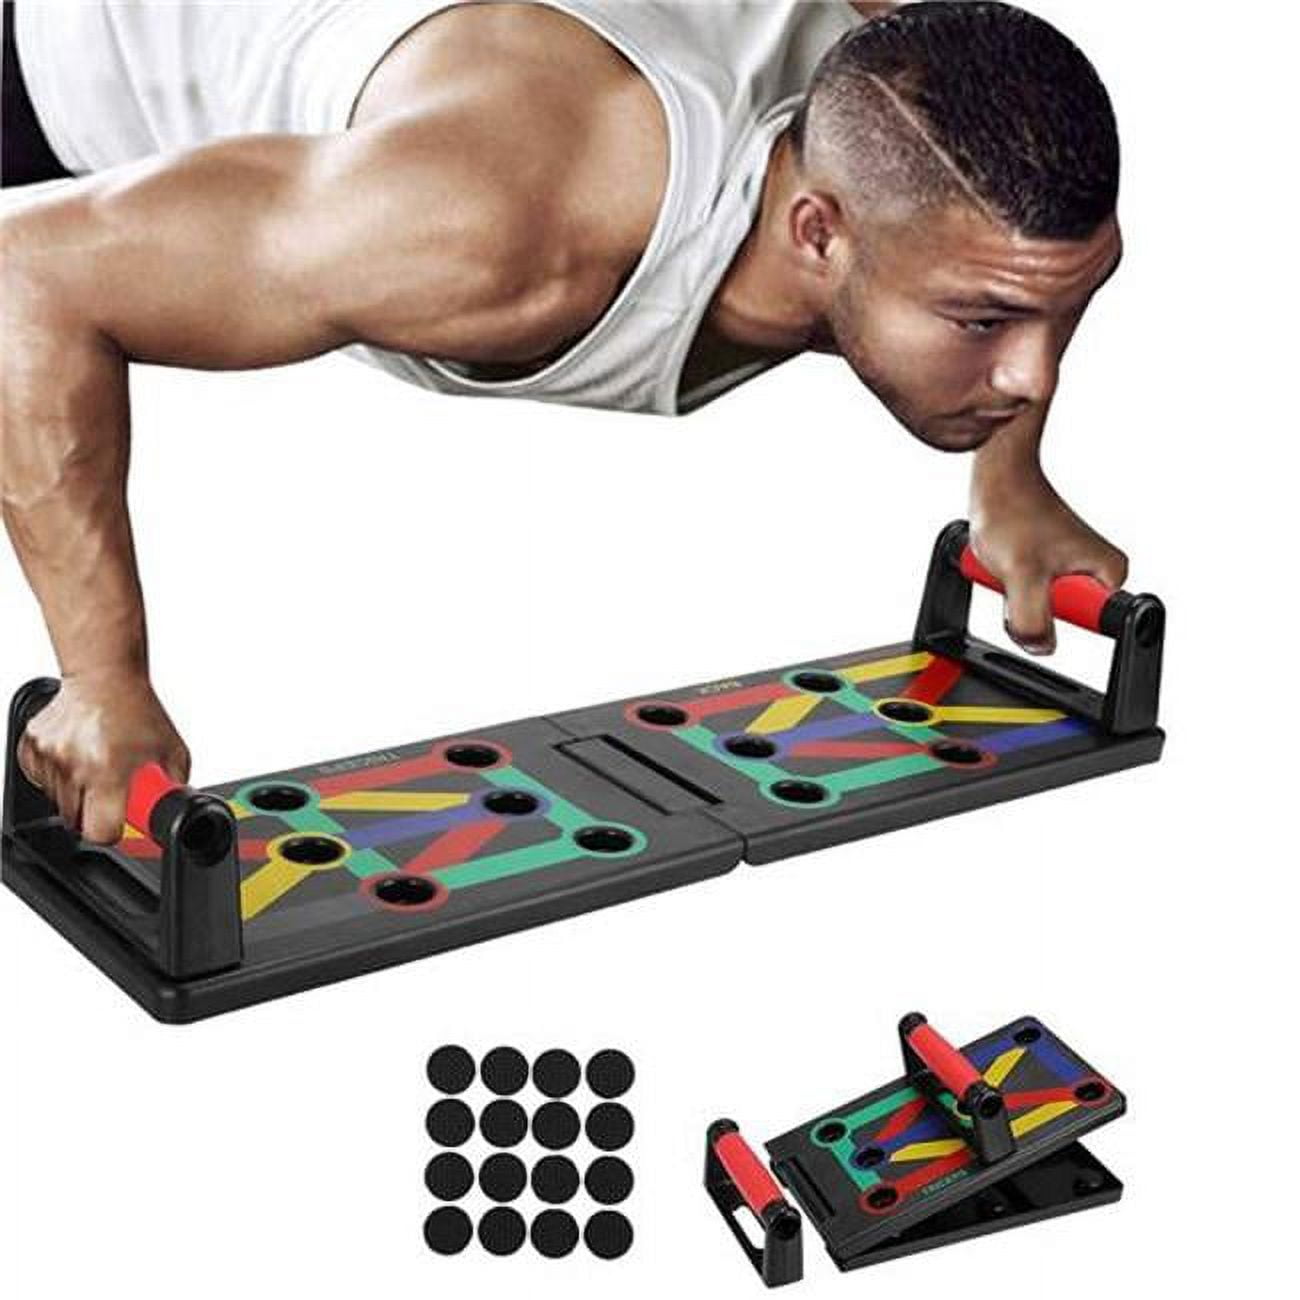 Push Up Board Set Foldable Home Gym Equipment w/ Resistance Bands & Pilates  Bar